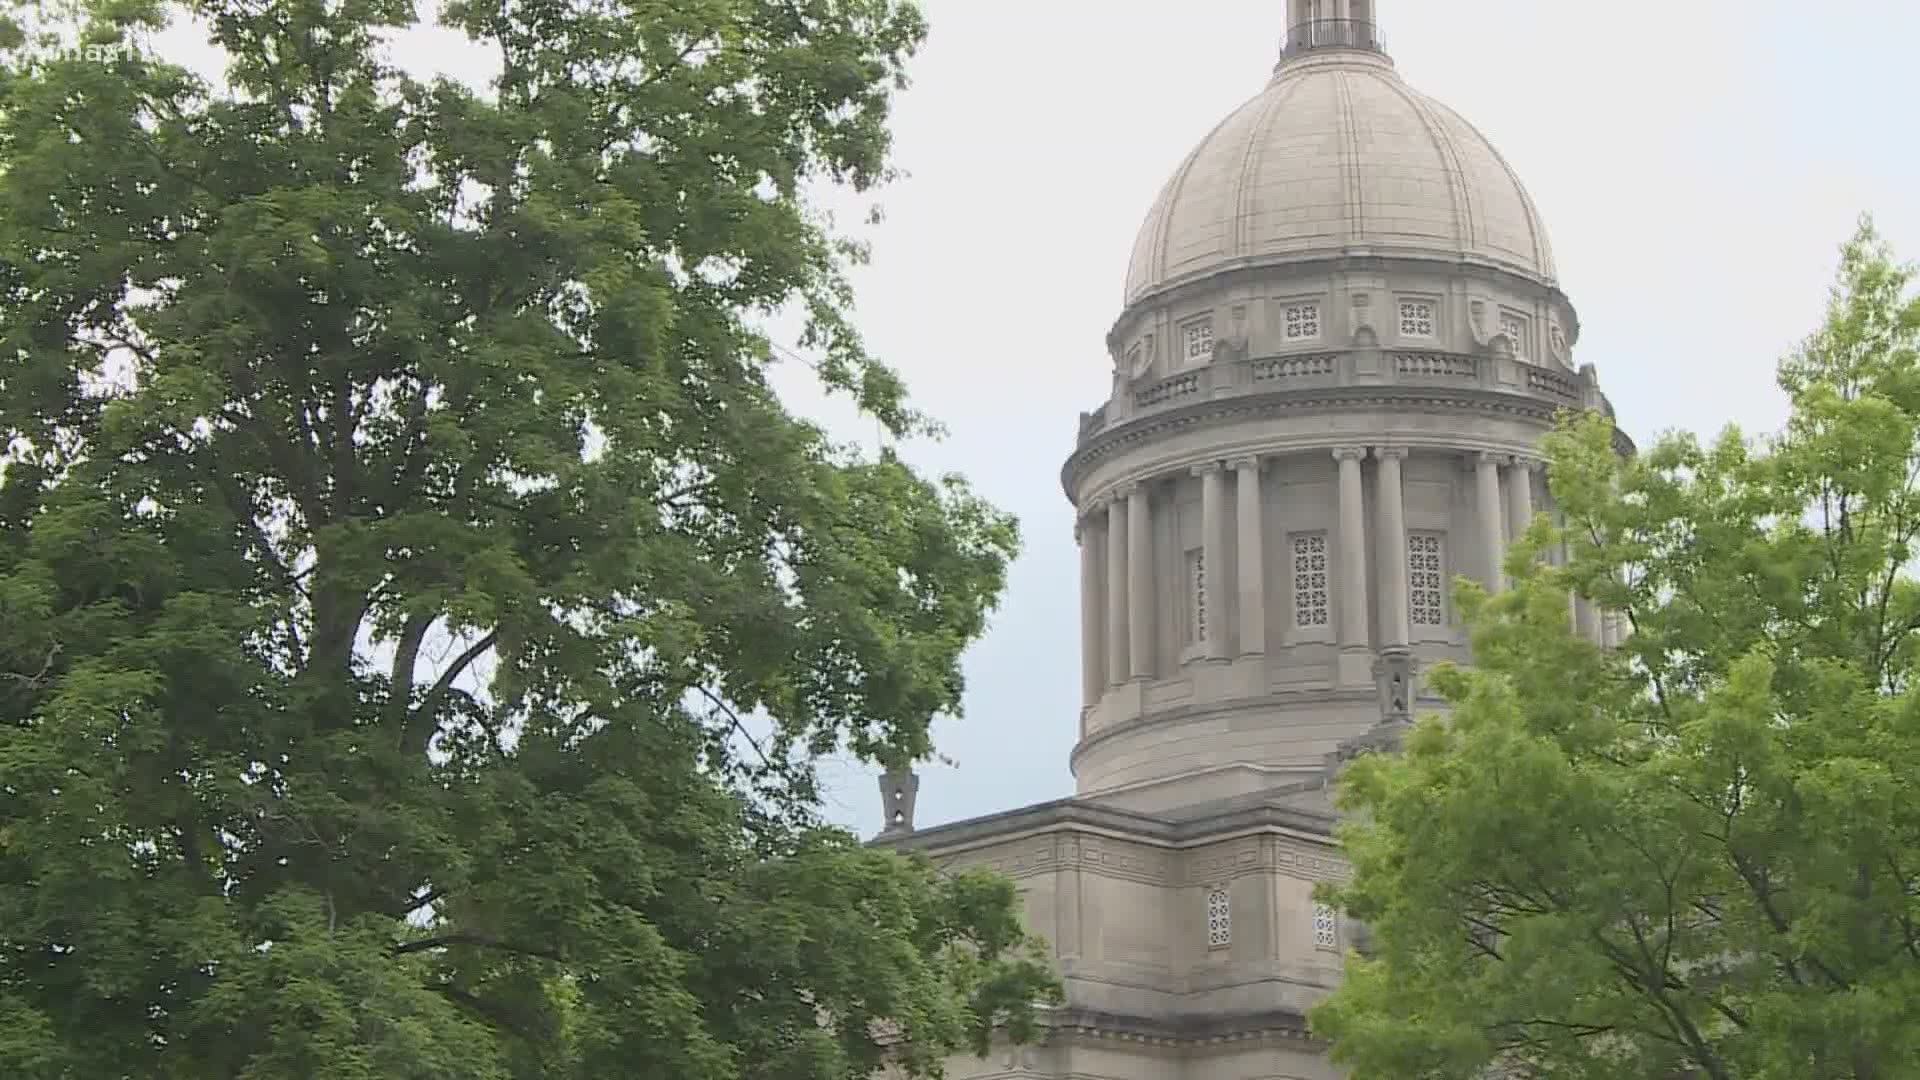 A host of new laws took effect in Kentucky all passed during the General Assembly's 2021 session.